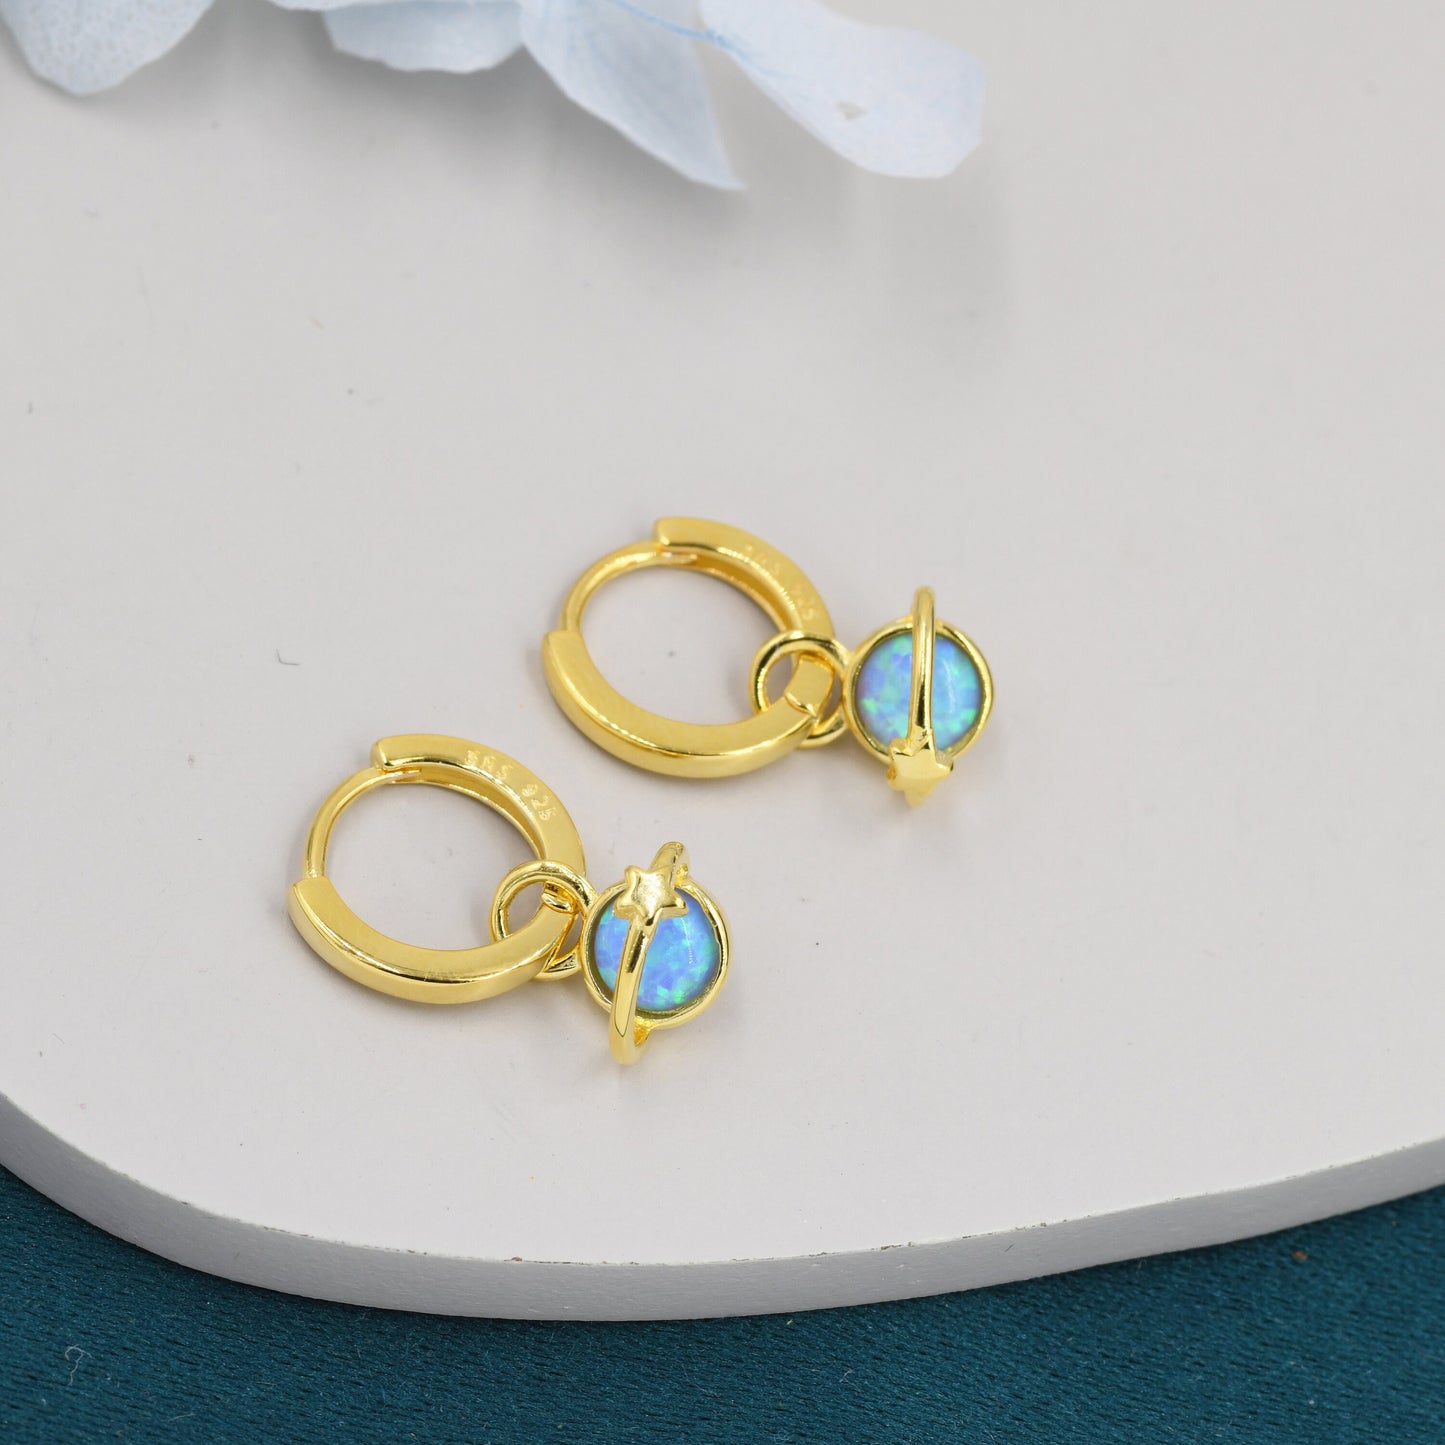 Blue Opal Planet and Star Huggie Hoop Earrings in Sterling Silver, Silver or Gold, Simulated Opal, Detachable Charms, Saturn Earrings